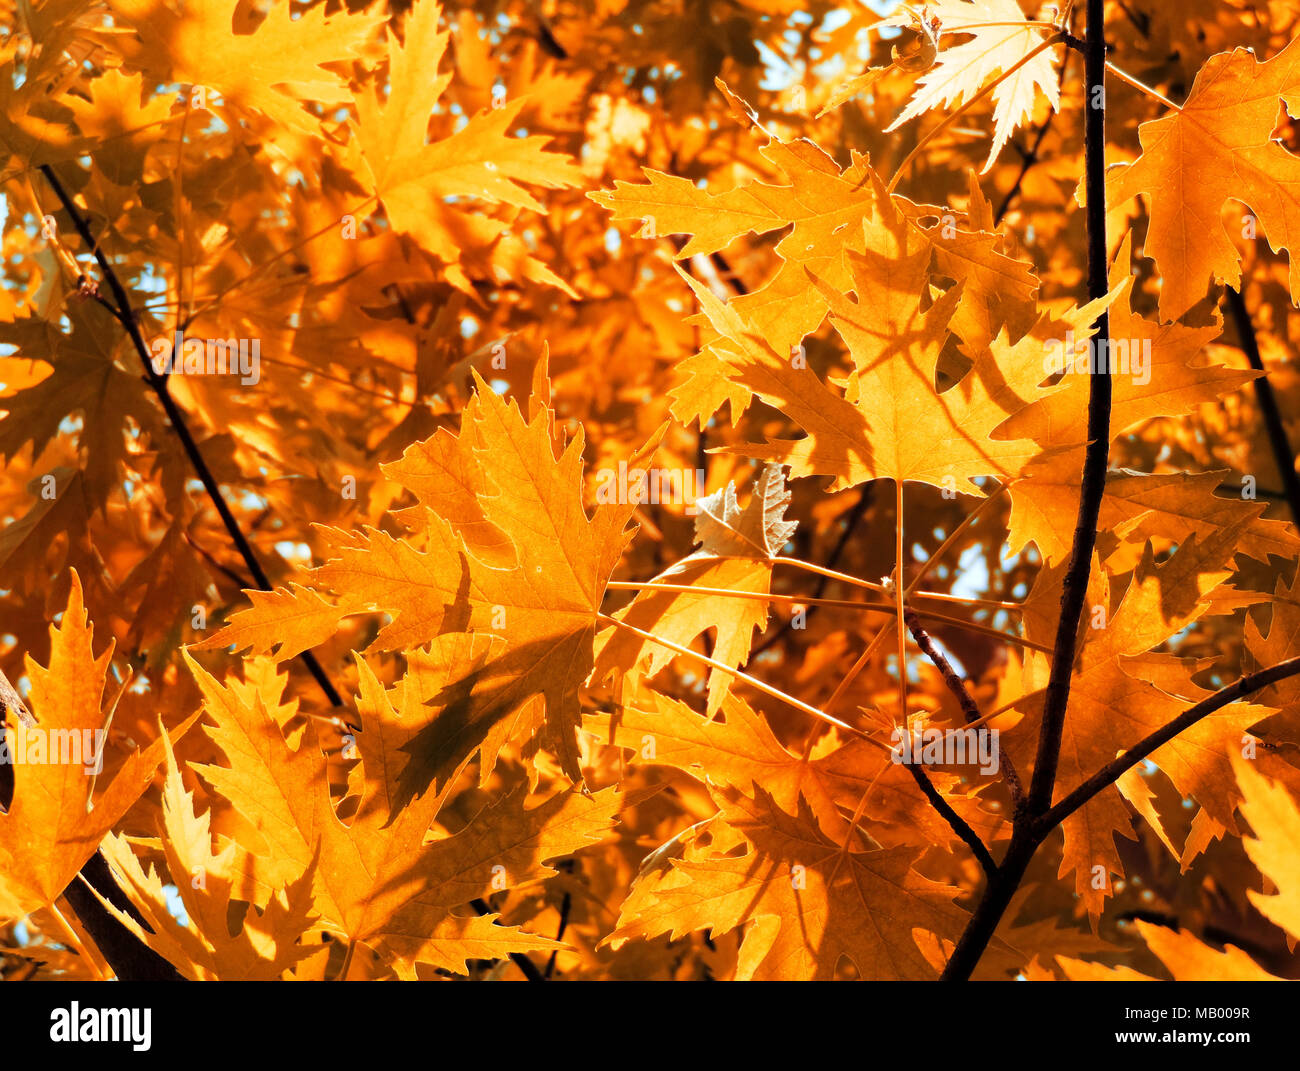 Autumn leaves background or autumn background with sunlight and selective focus. Mountain maple leaves in the sun with copy space. Nature frame. Stock Photo